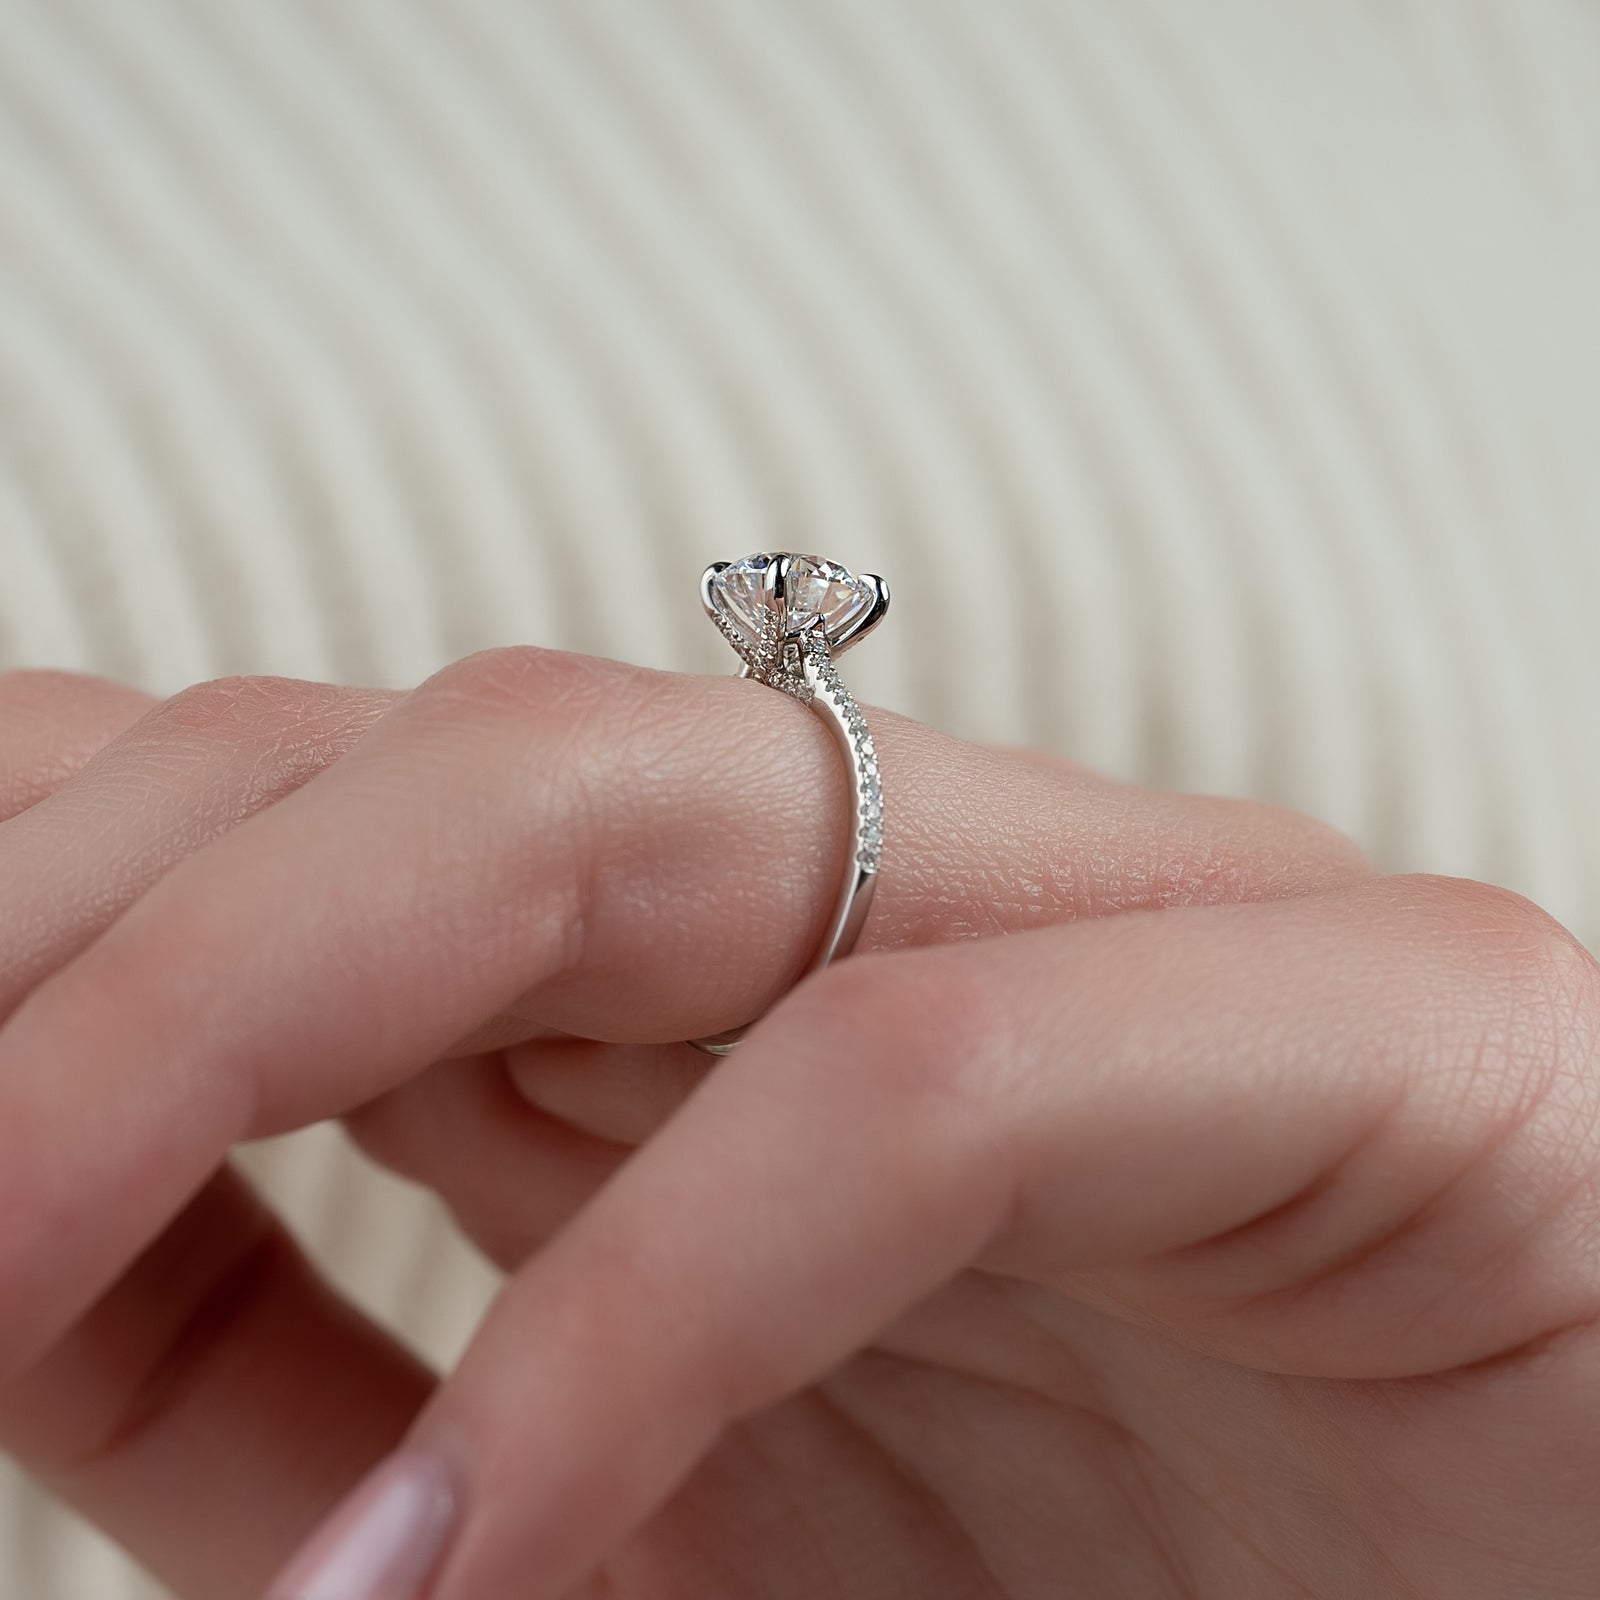 The Pave Claire WG R data-carat=2.5 data-metal=white-gold